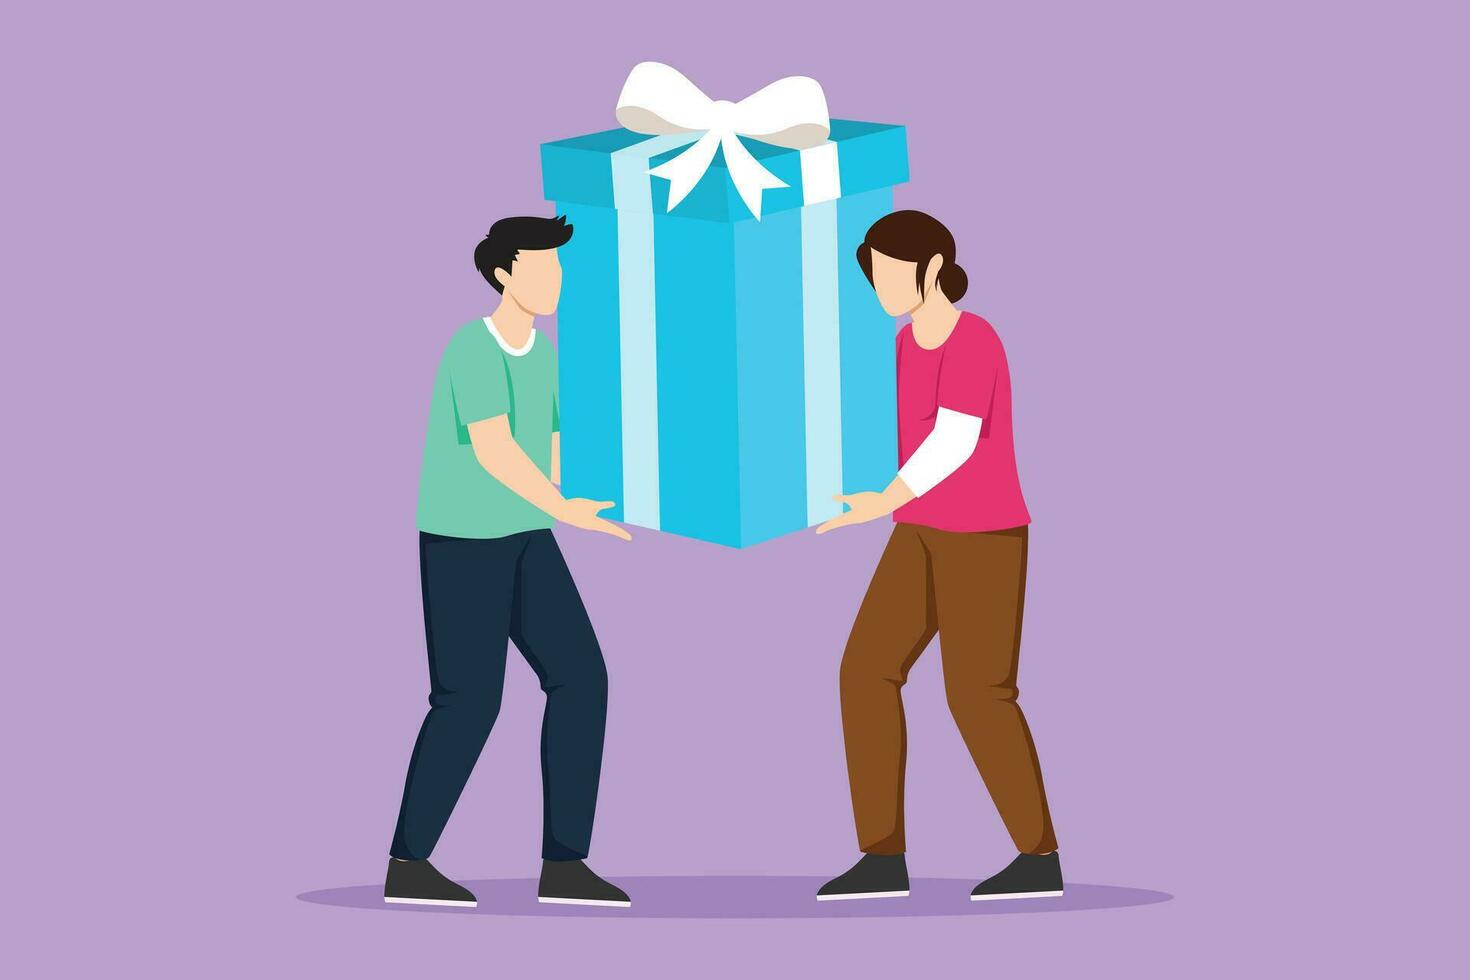 Cartoon flat style drawing happy couple man and woman are carrying a huge gift box. Big bonus or special offer for best employee. Happy birthday present from office. Graphic design vector illustration